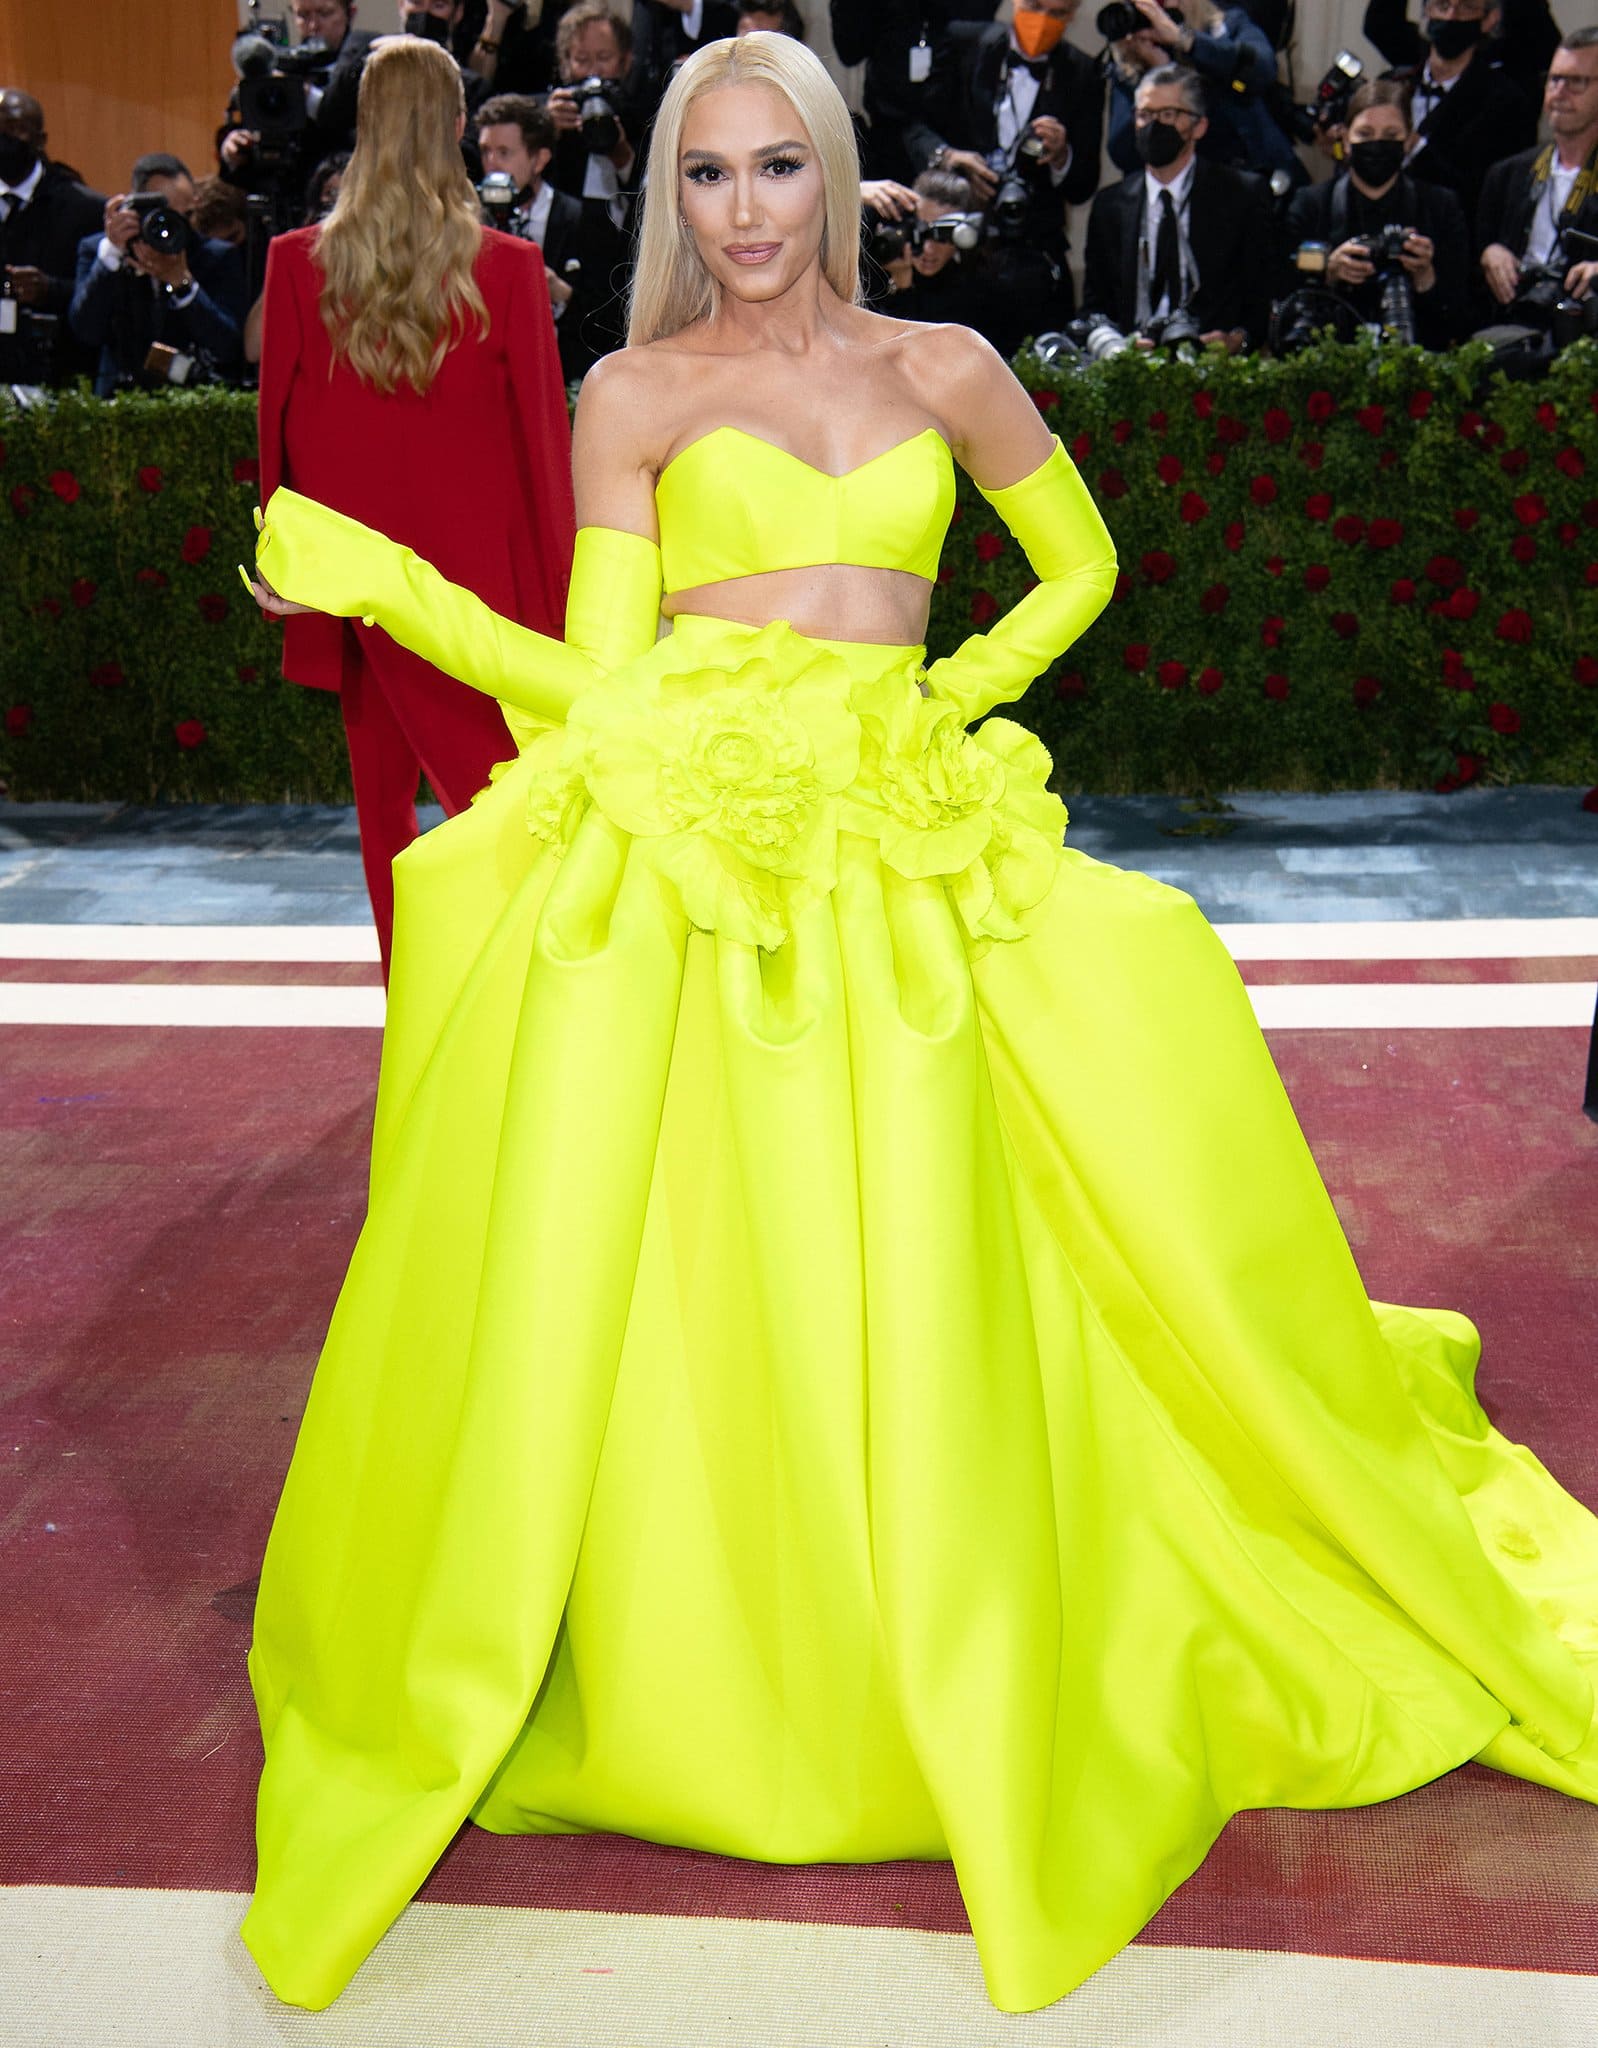 Gwen Stefani flashes her toned midriff in a two-piece neon gown from Vera Wang